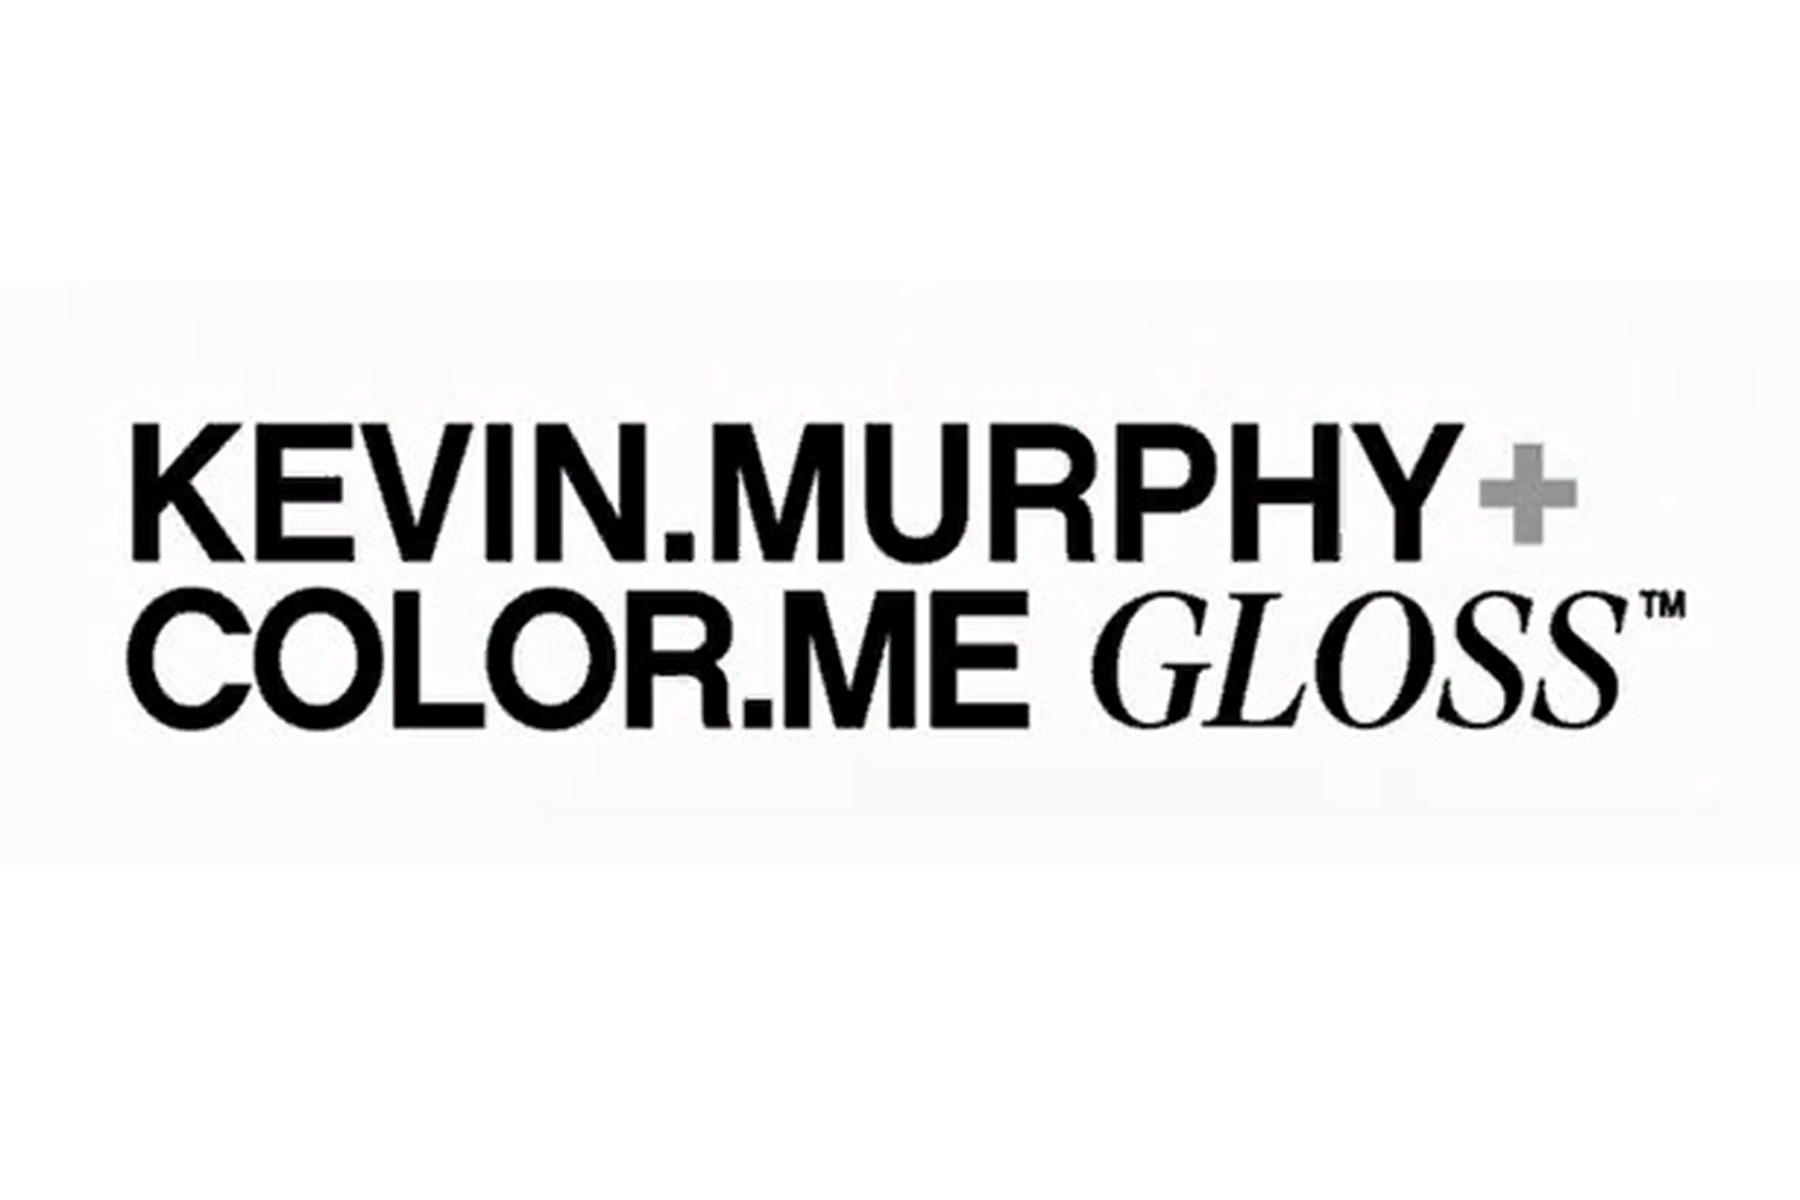 KEVIN.MURPHY + COLOR.ME GLOSS